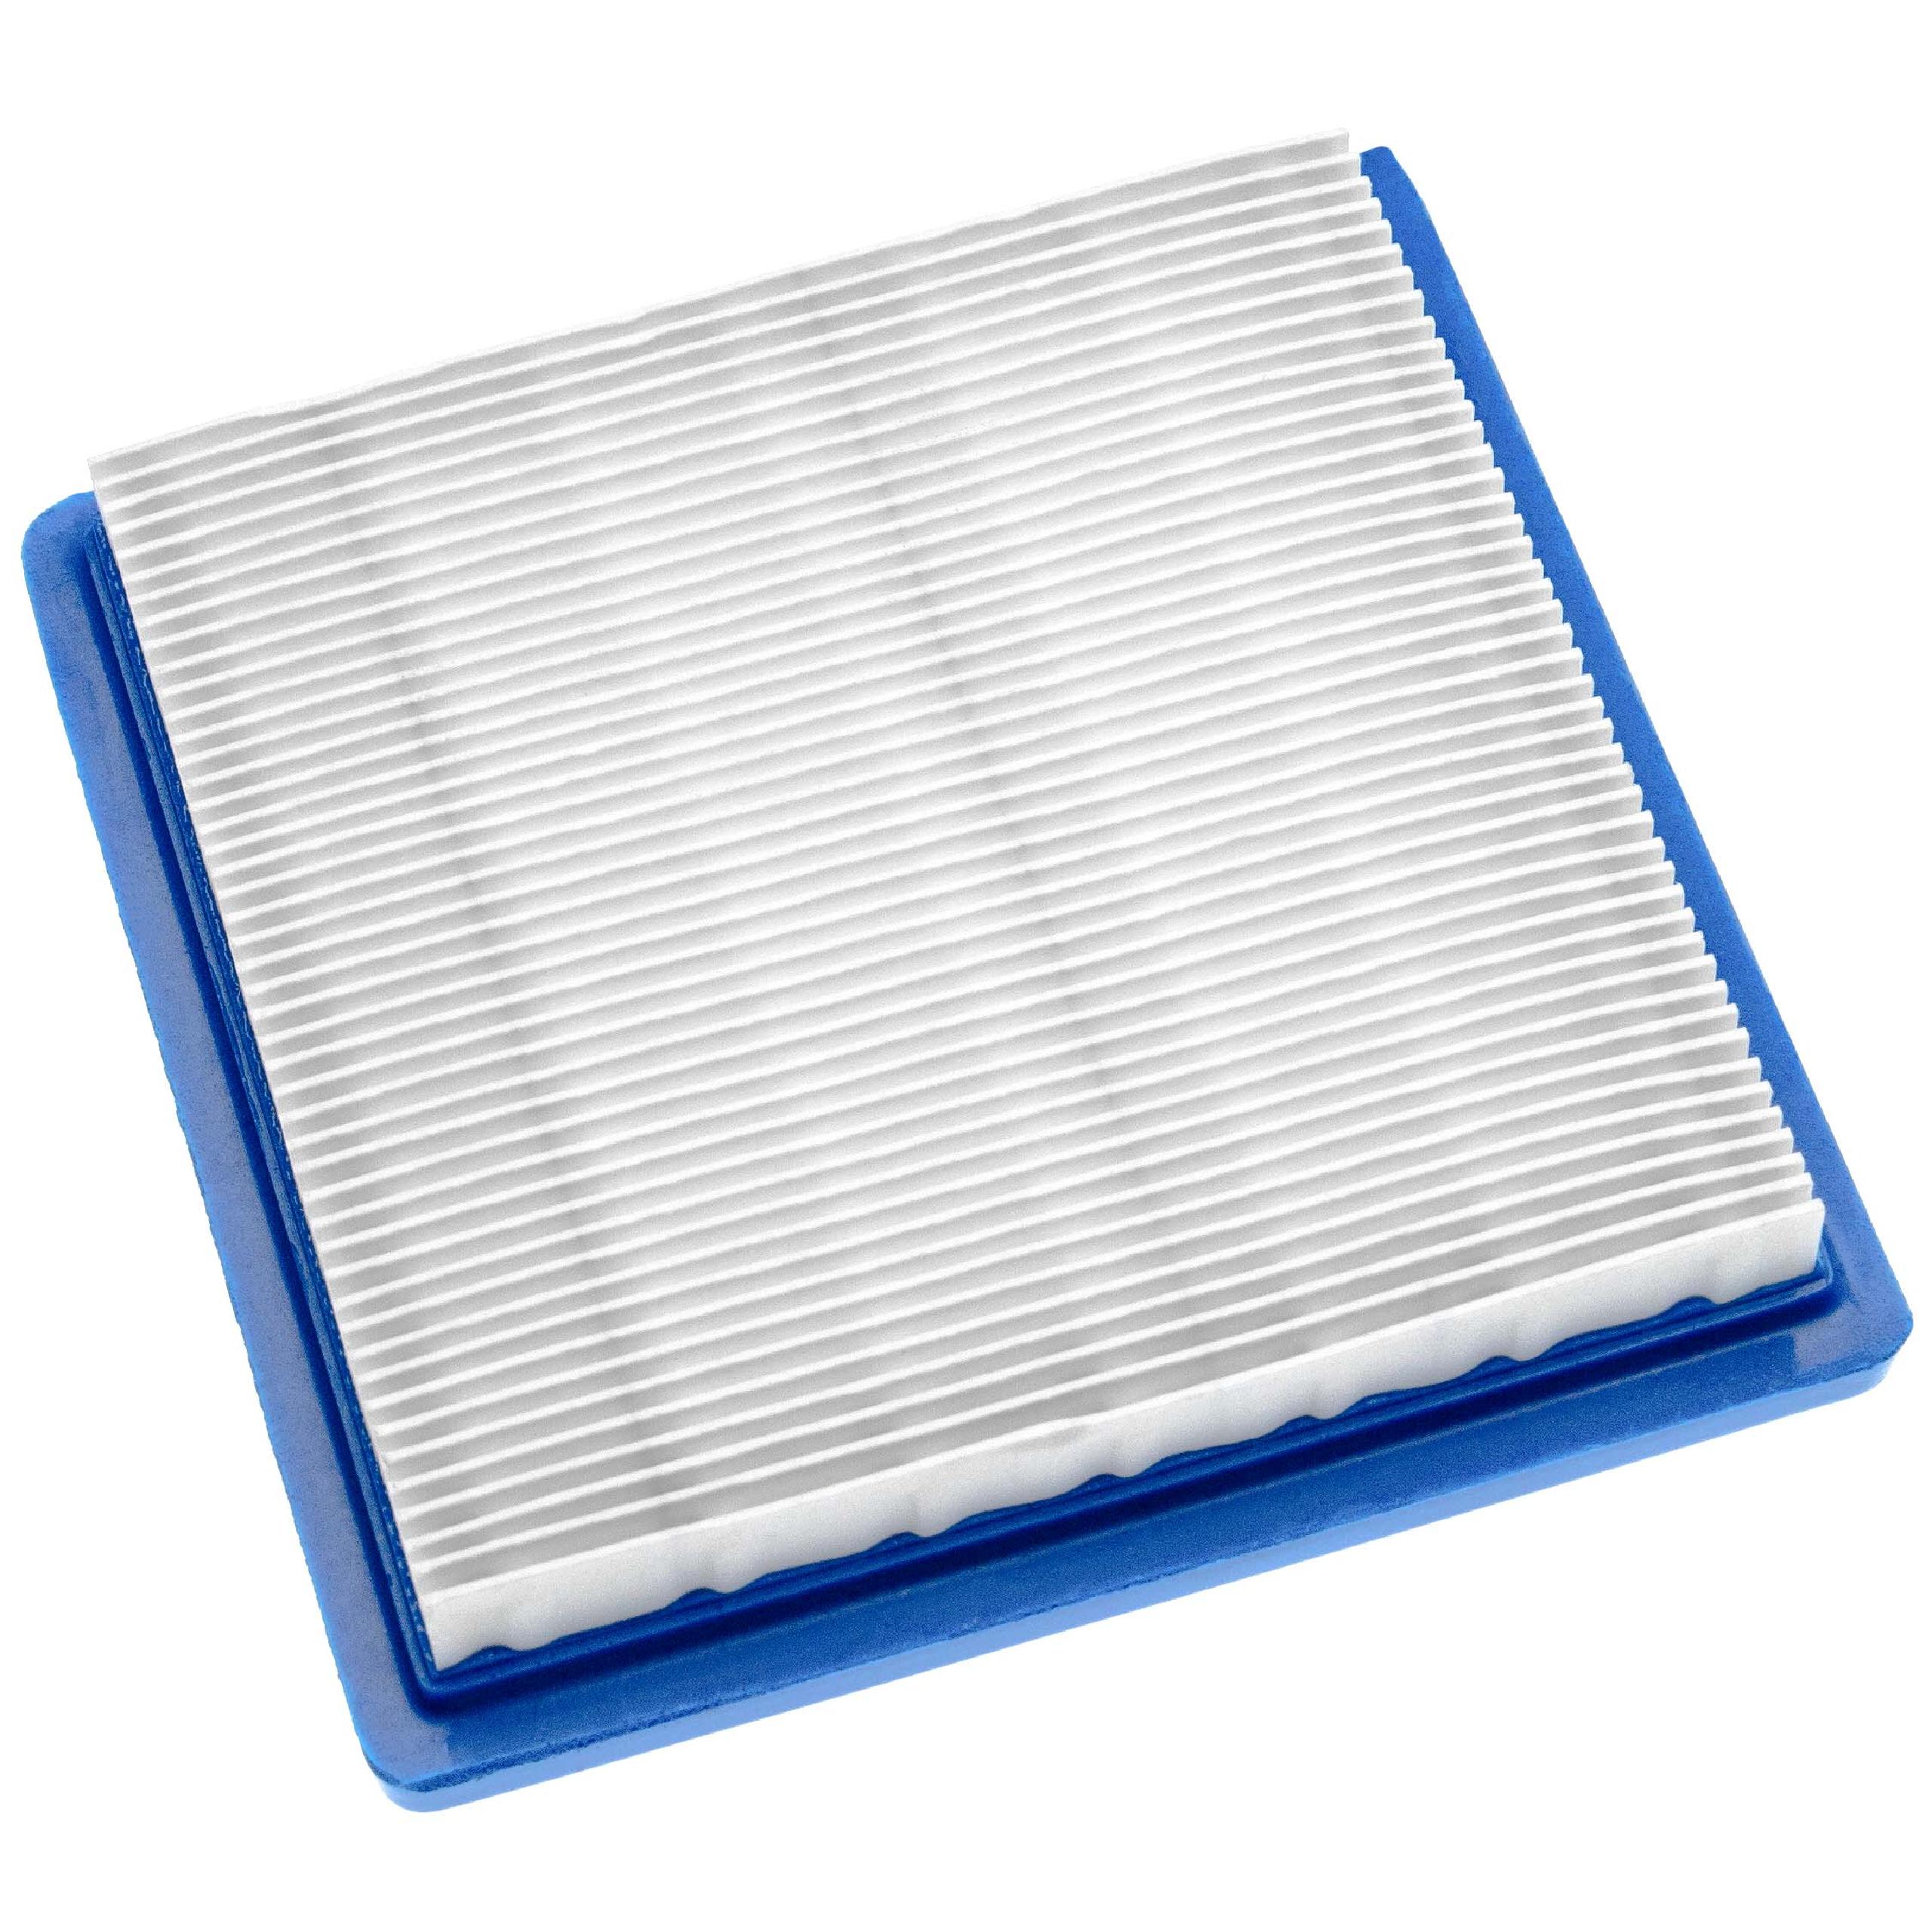 vhbw Replacement Air Filter Replacement for Briggs & Stratton 399877, 399877S for Motor